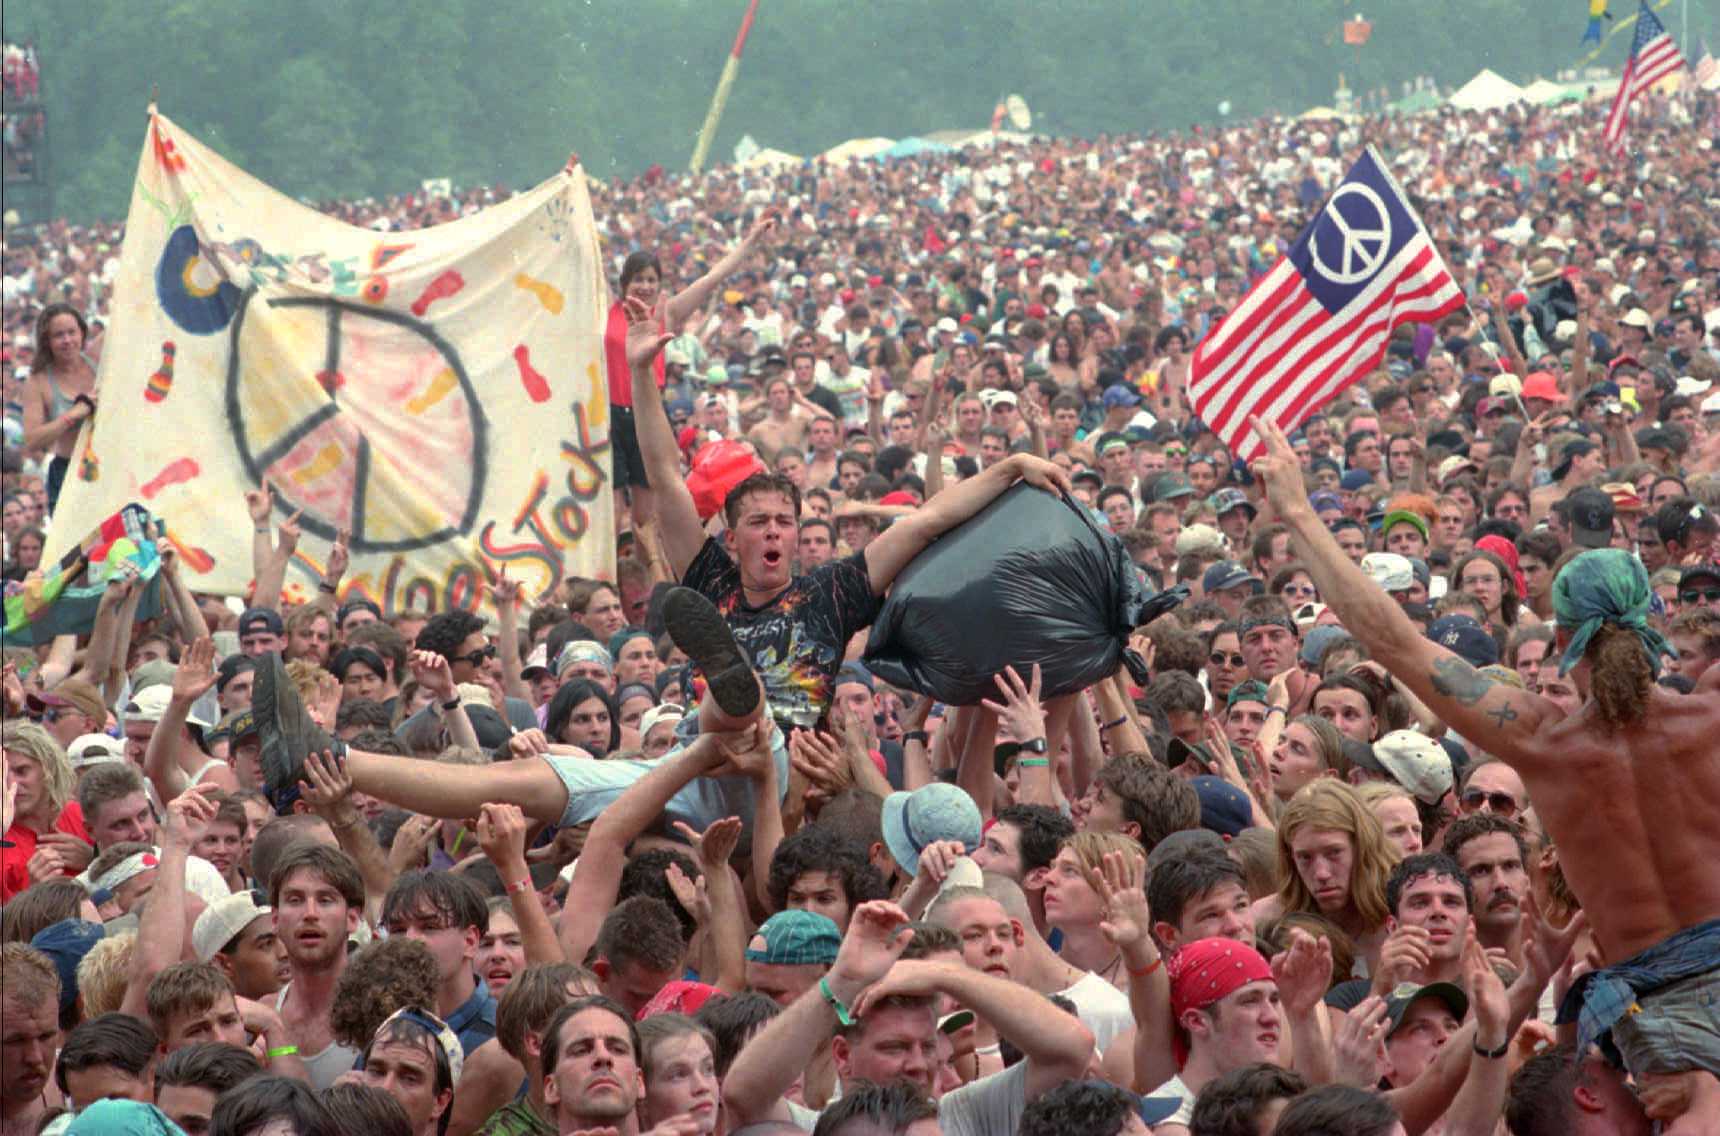 Happy National Underwear Day! 25th Anniversary of Woodstock